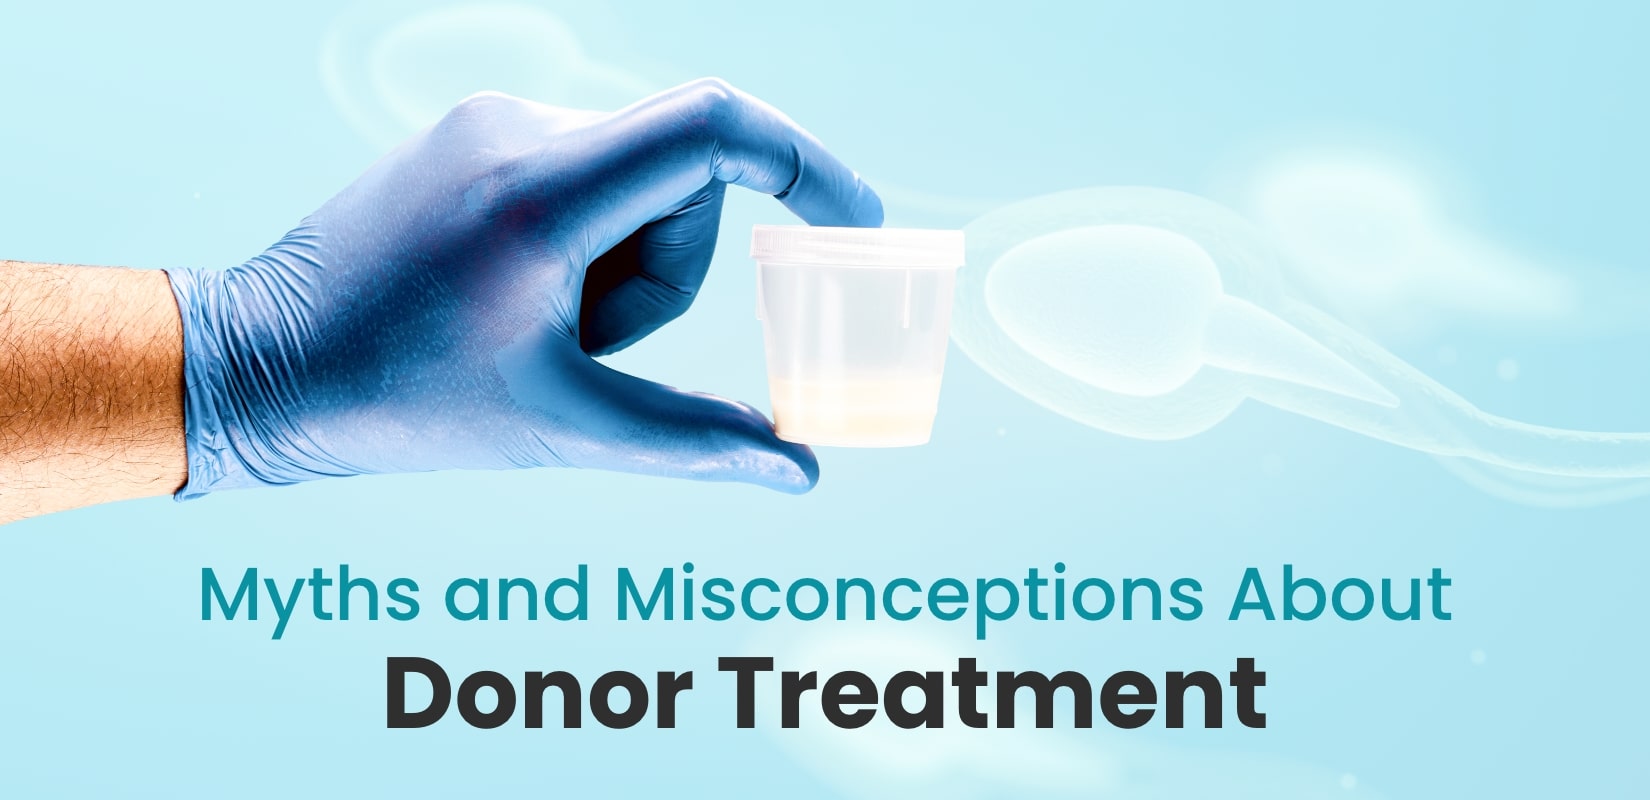 Myths and Misconceptions About Donor Treatment